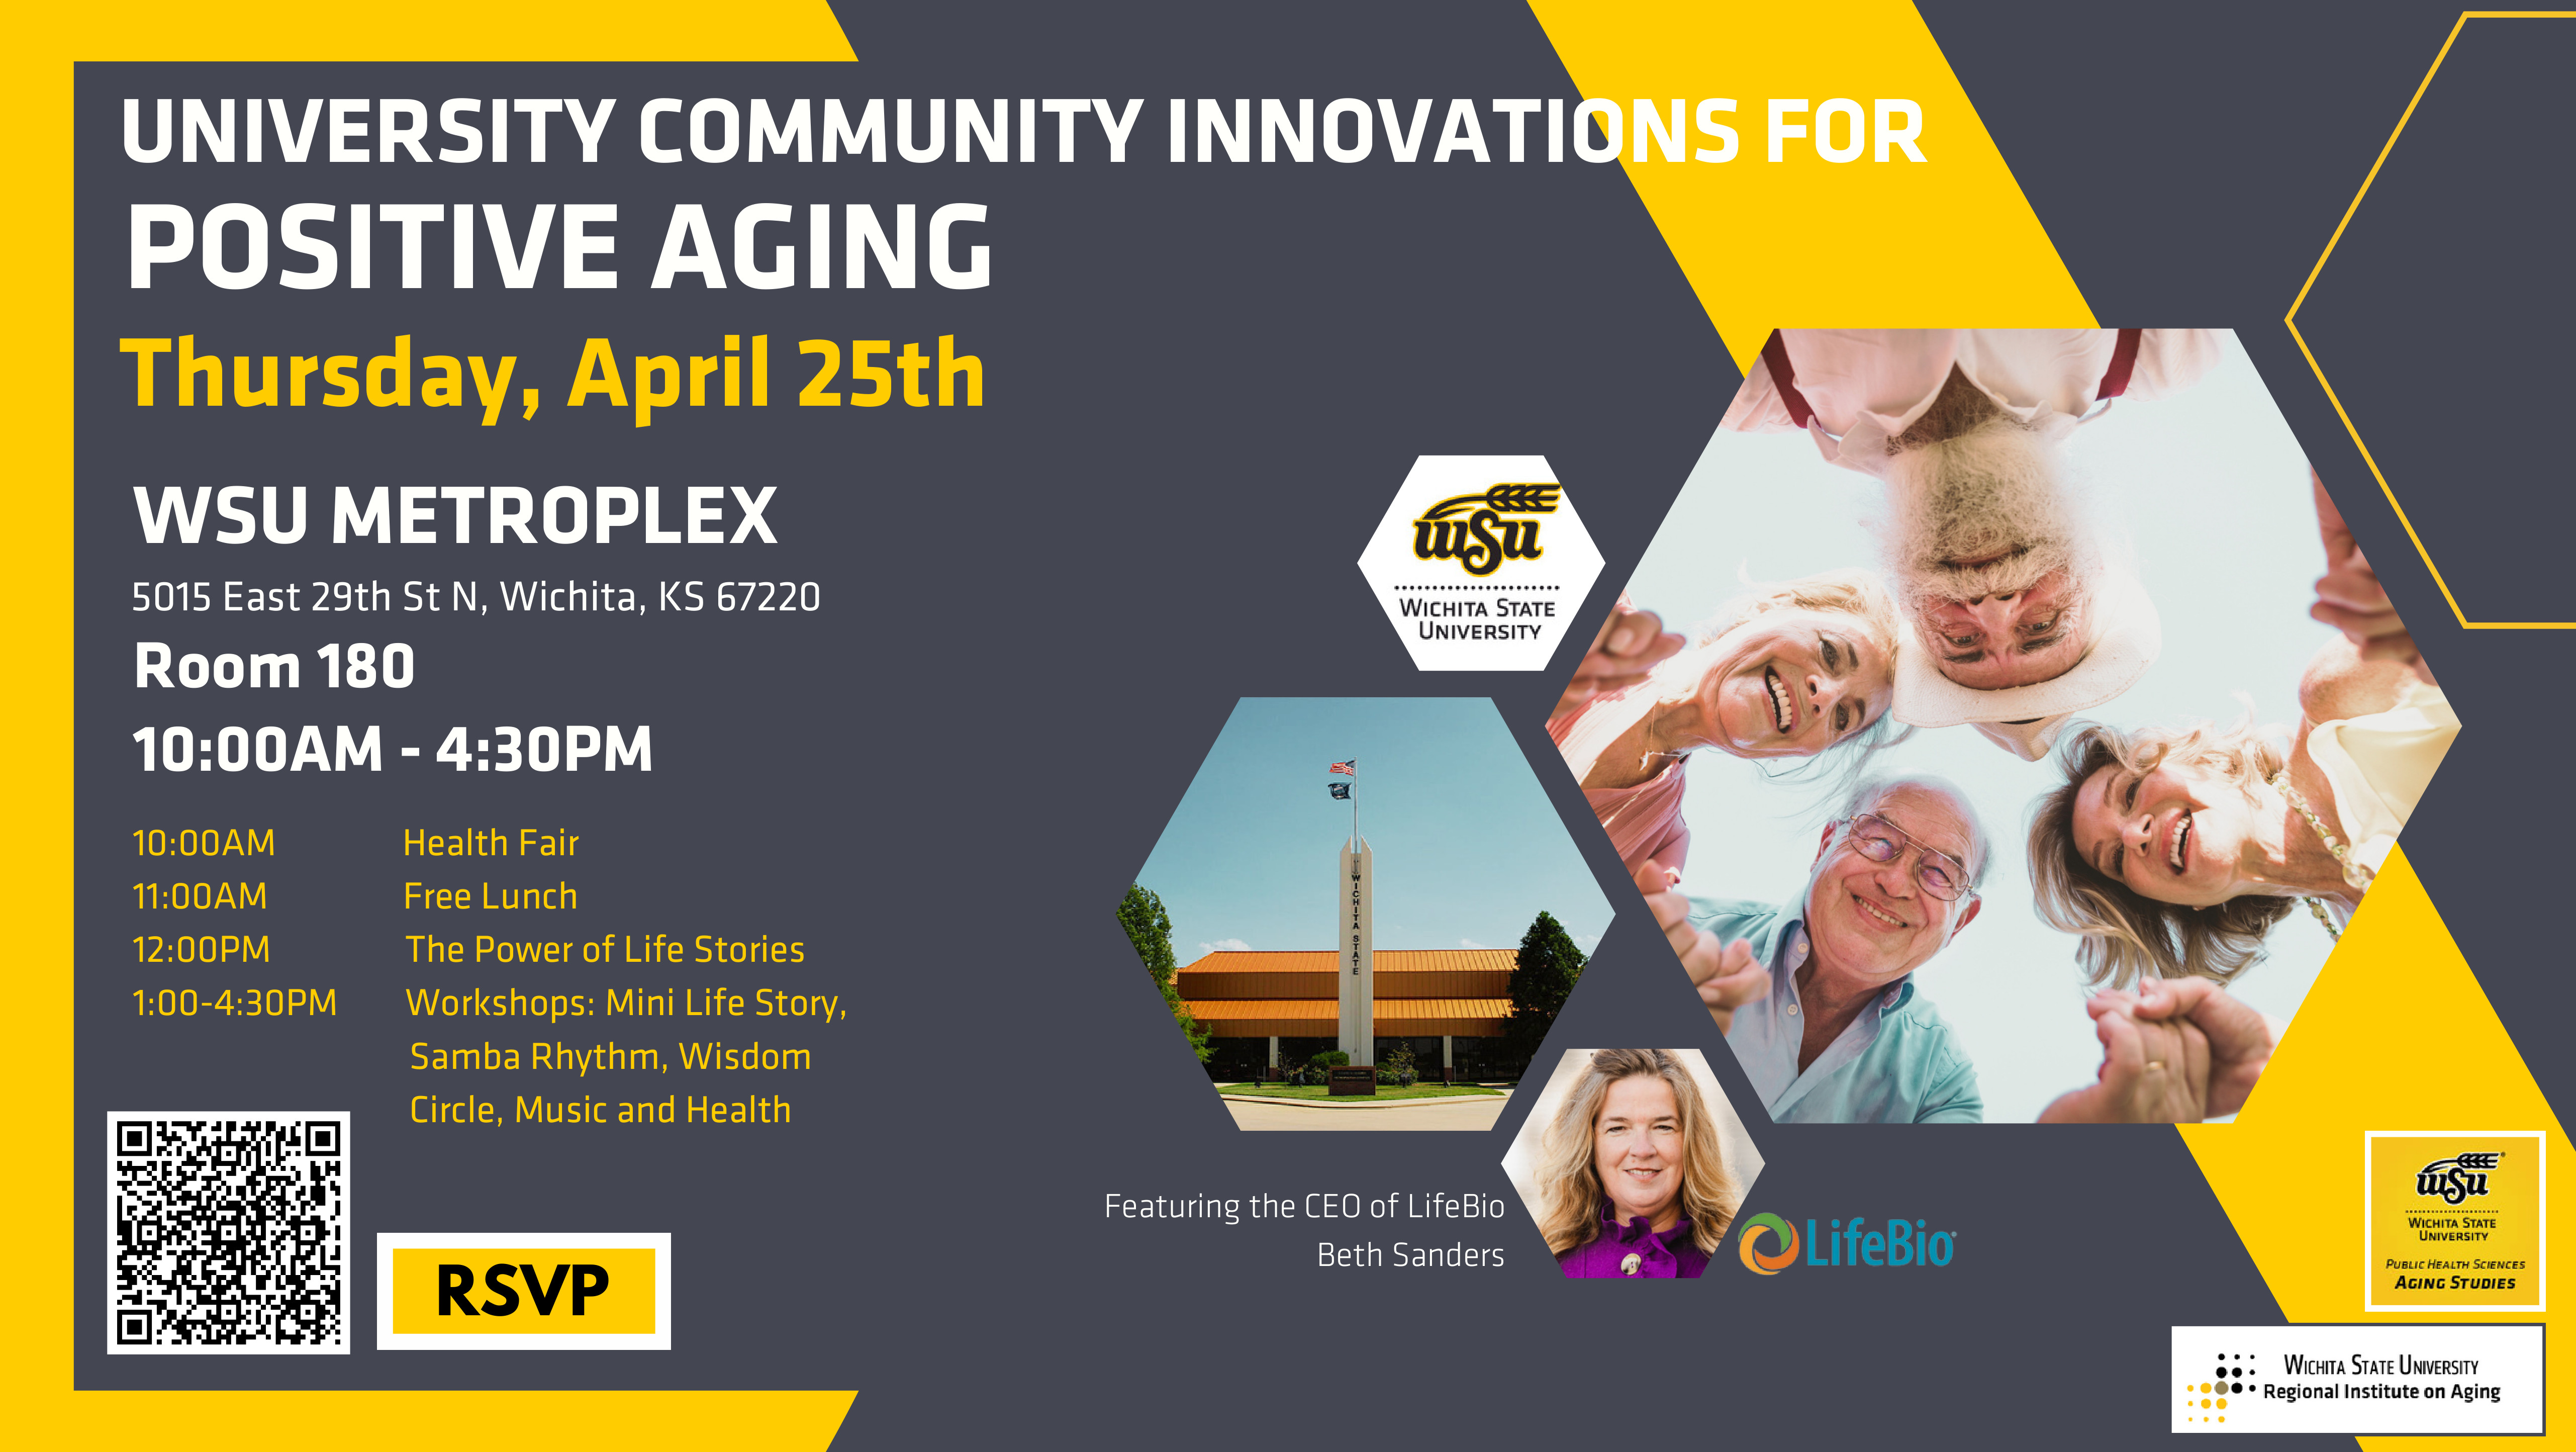 The image is depicting a flyer for the University Community Innovations for Positive Aging Event. The event is on Thursday April 25, 2024. The event is at the WSU Metroplex 5015 East 29th St N, Wichita, KS 67220. The Room is 180, and the times of the event are from 10:00 AM - 4:30 PM. The events are the Health Fair, Free Lunch, The Power of Life Stories, Workshops: Mini Life Story, Samba Rhythm, Wisdom Circle, Music and Health. The images on the left of the flyer depict the WSU logo, older adults looking down in a circle, Beth Sanders, (the CEO of LifeBio), and the Metroplex. 